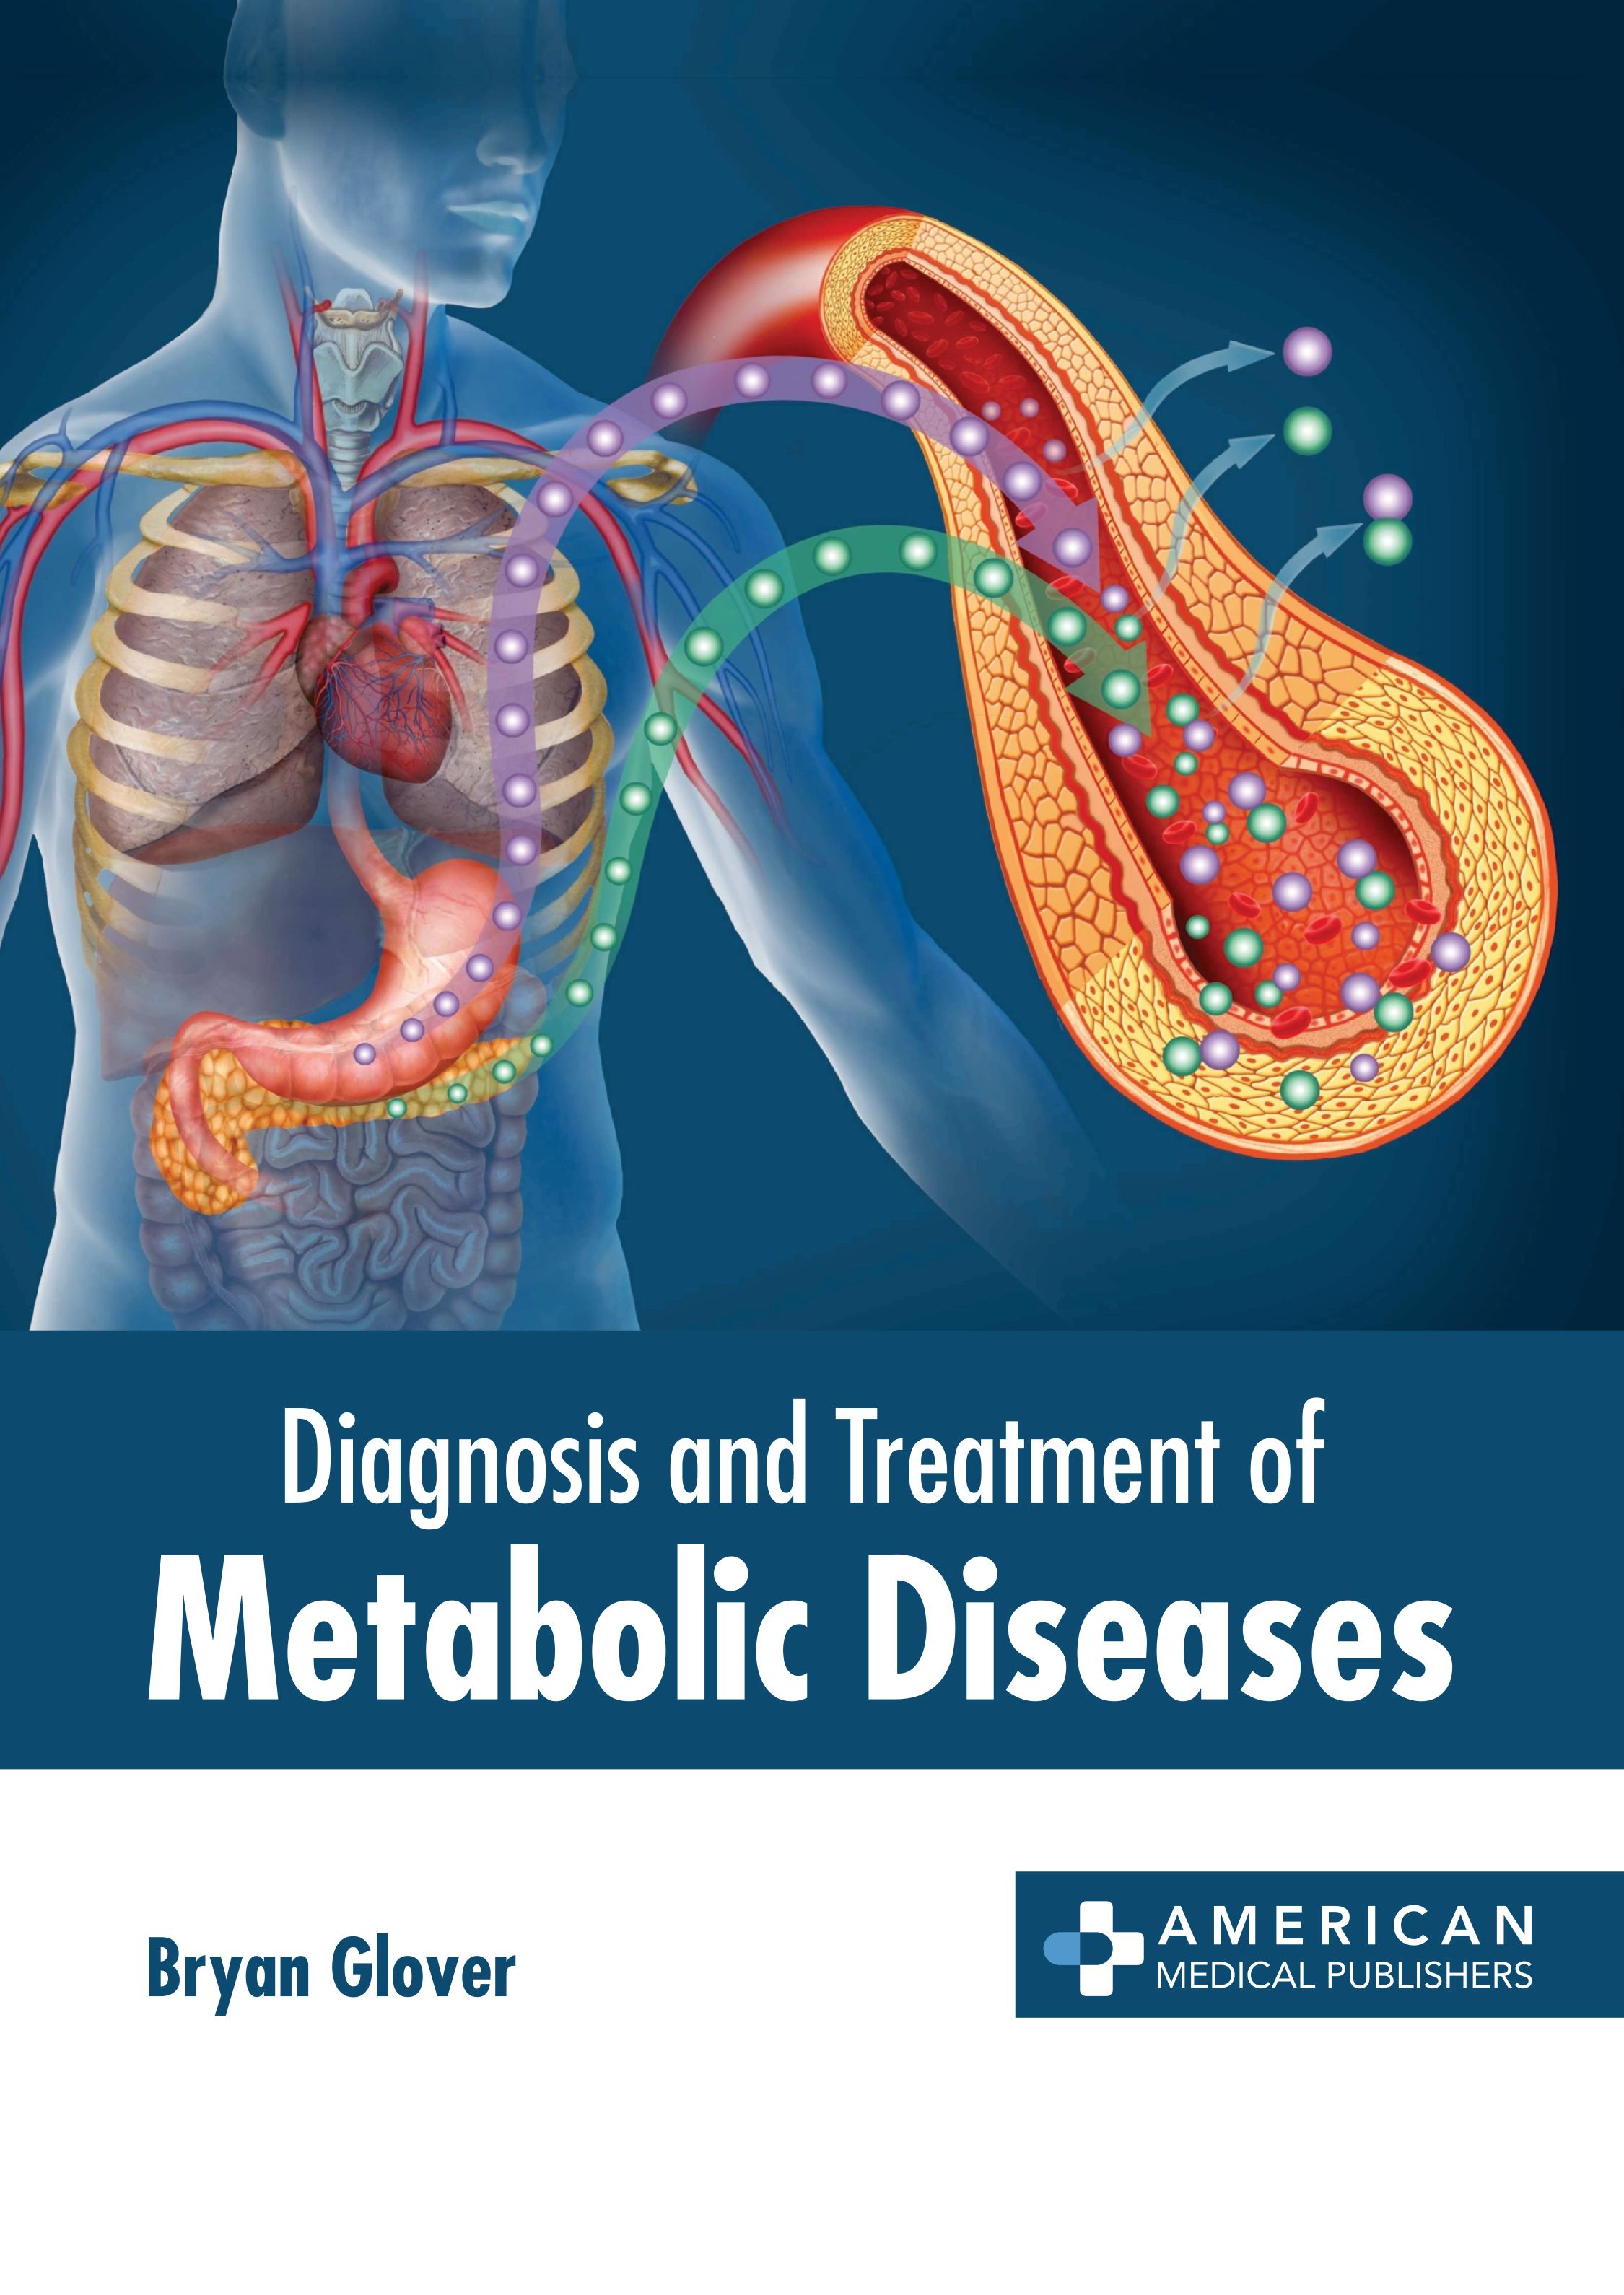 DIAGNOSIS AND TREATMENT OF METABOLIC DISEASES